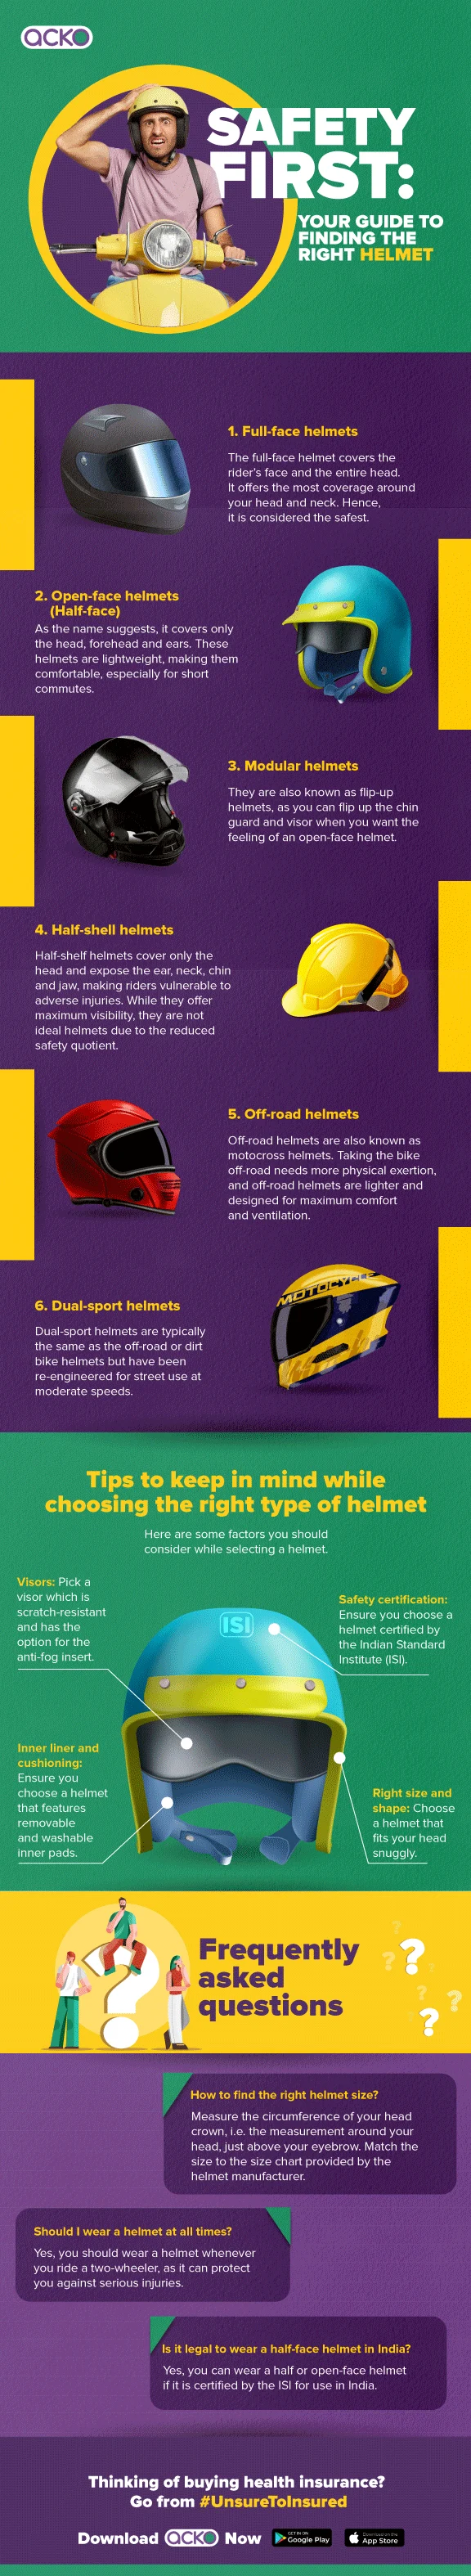 Your Guide to Finding the Right Helmet